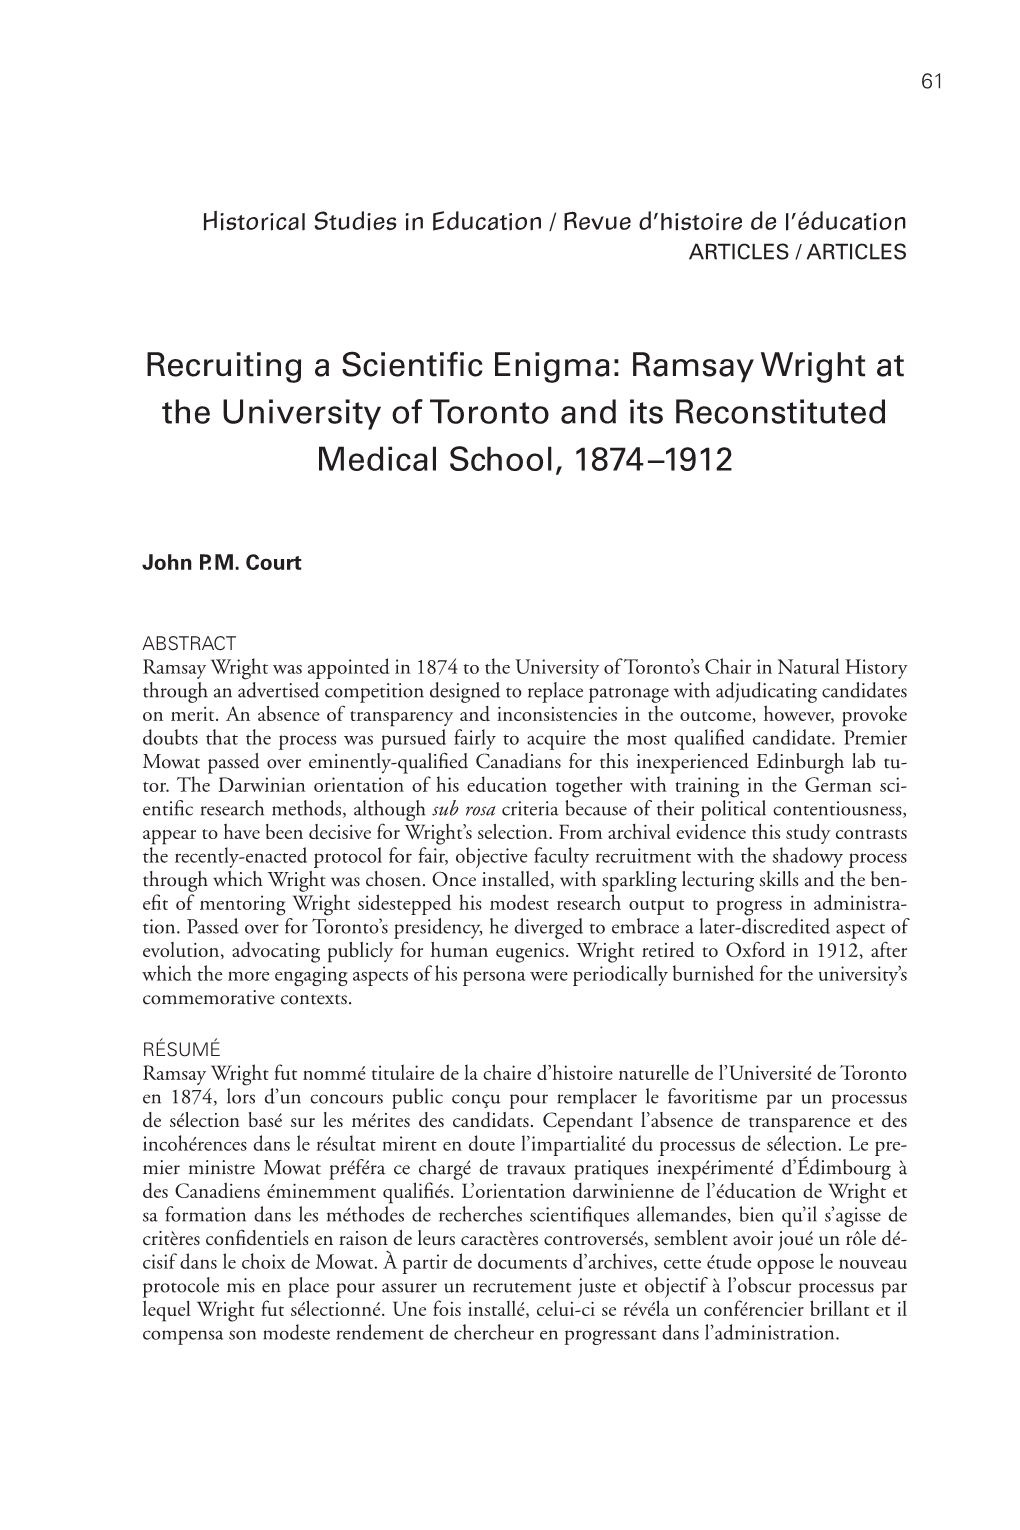 Ramsay Wright at the University of Toronto and Its Reconstituted Medical School, 1874–1912